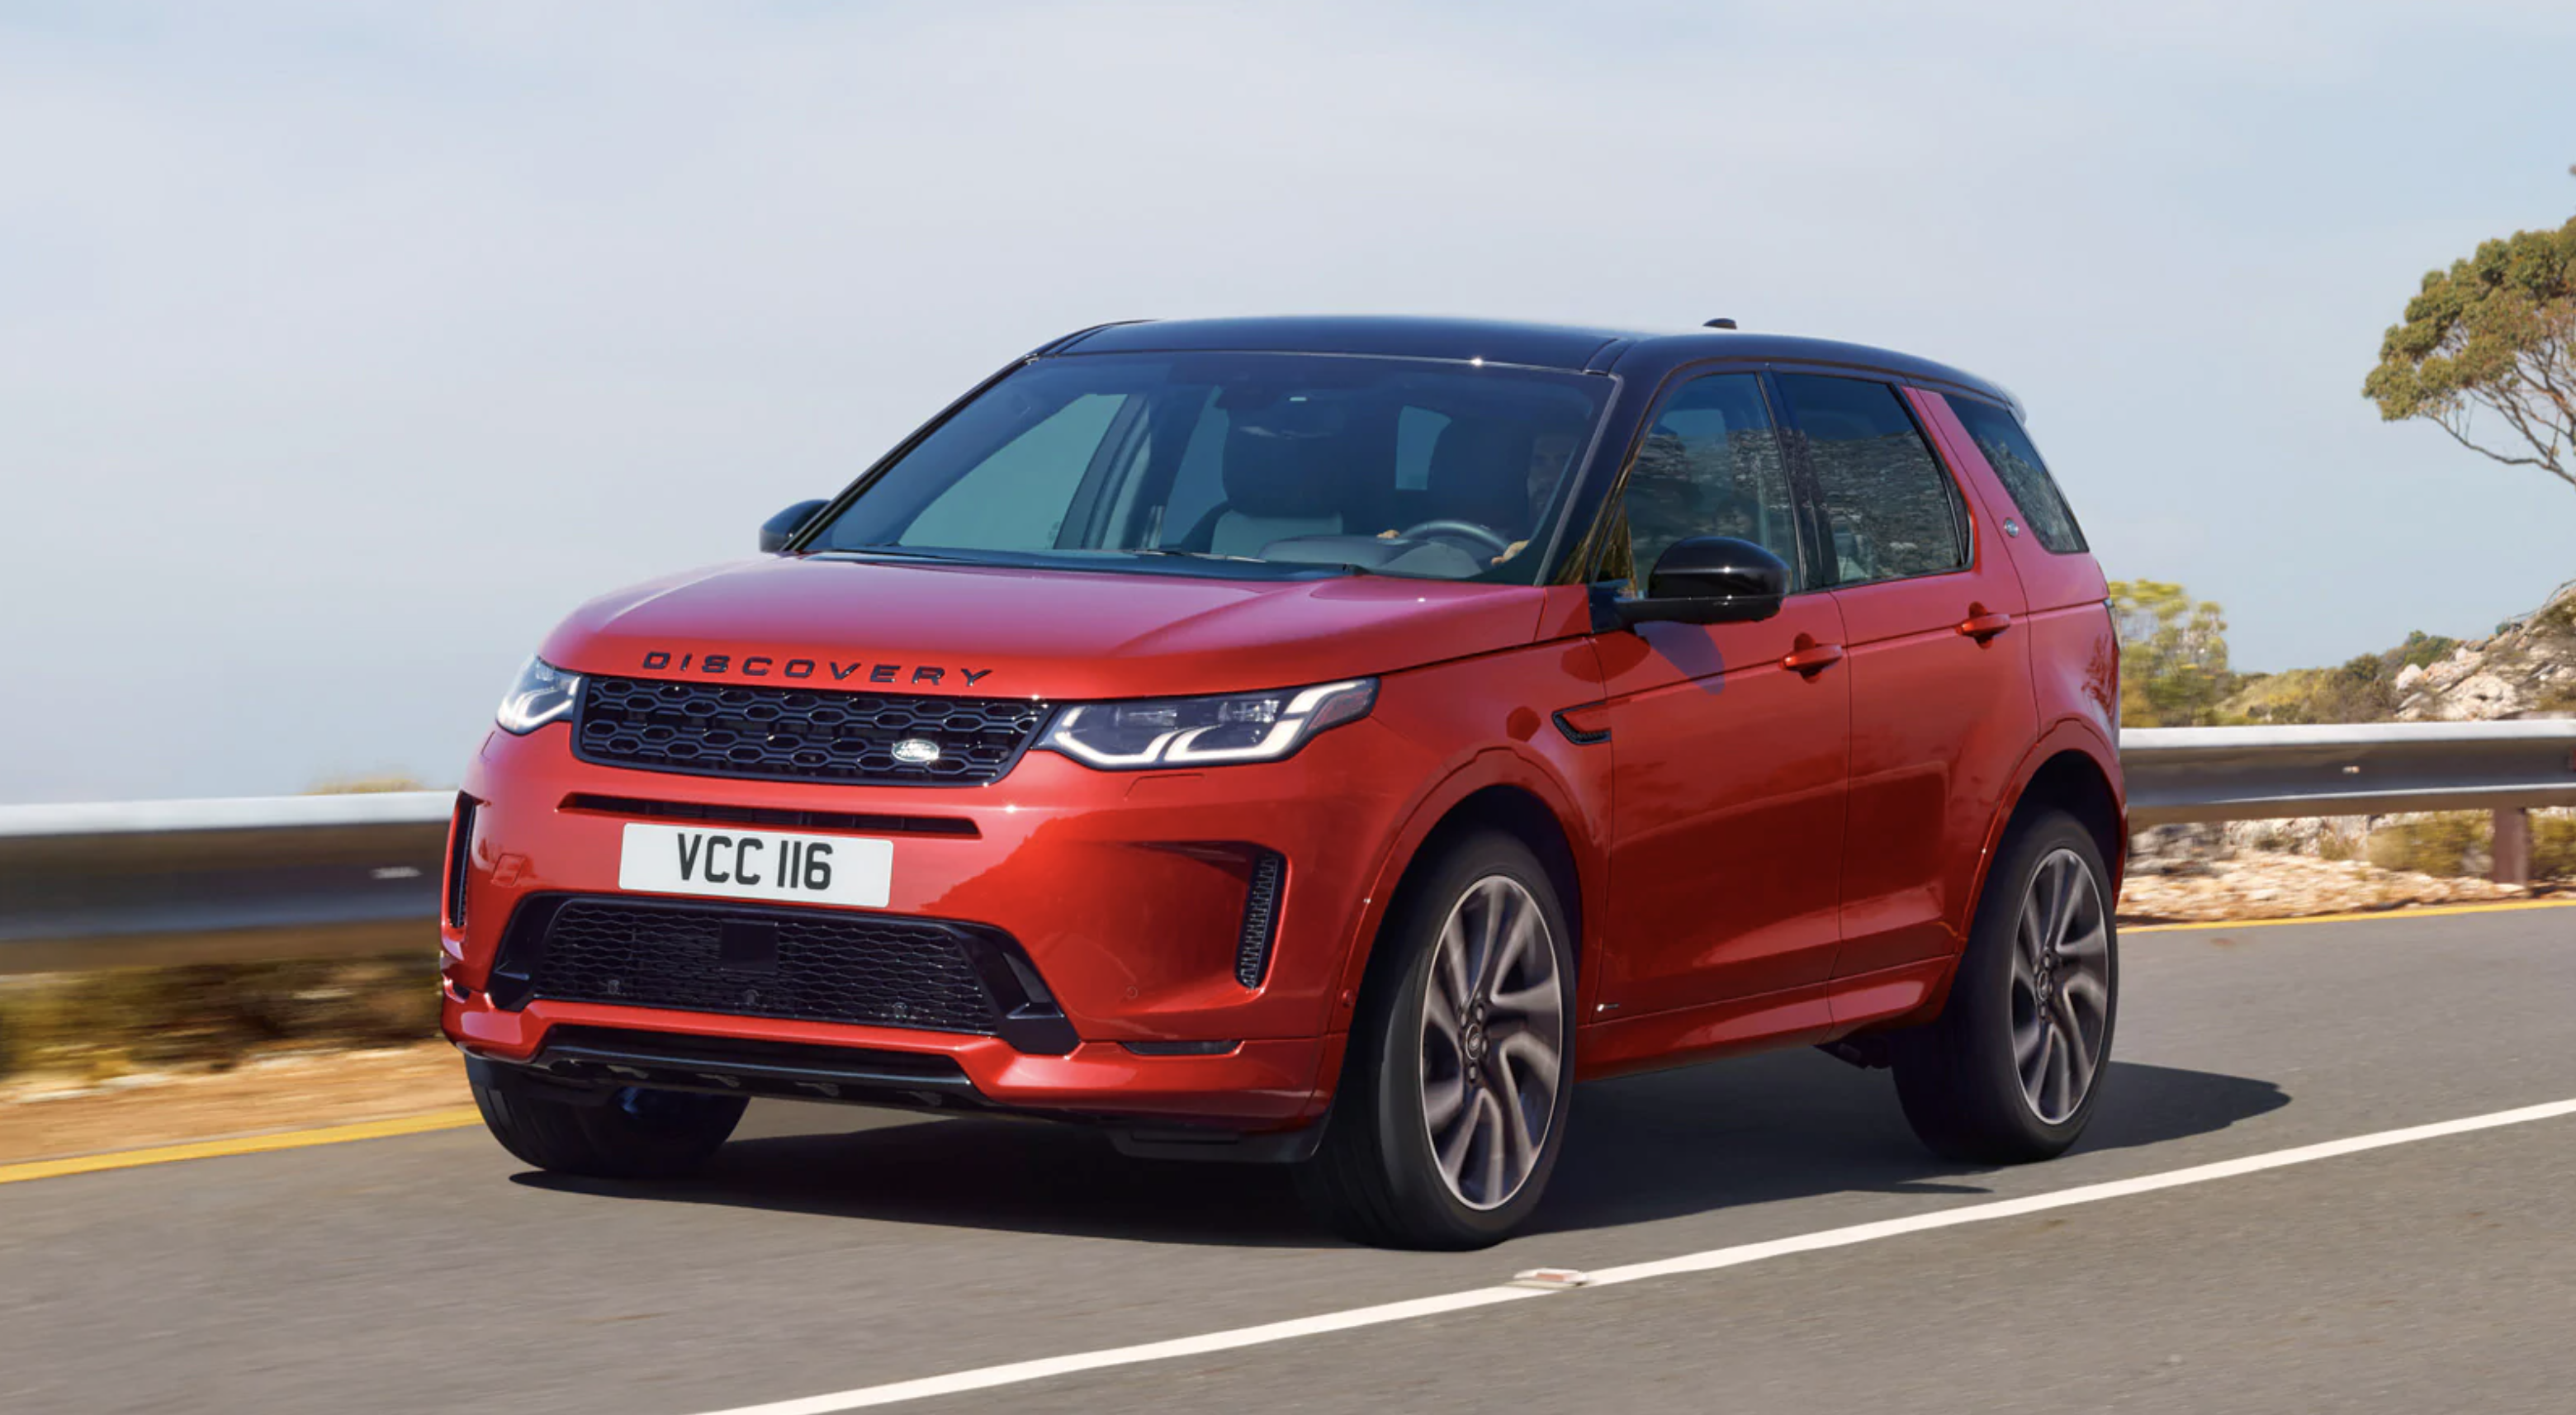 2019 Land Rover Discovery Sport: Specs & Info